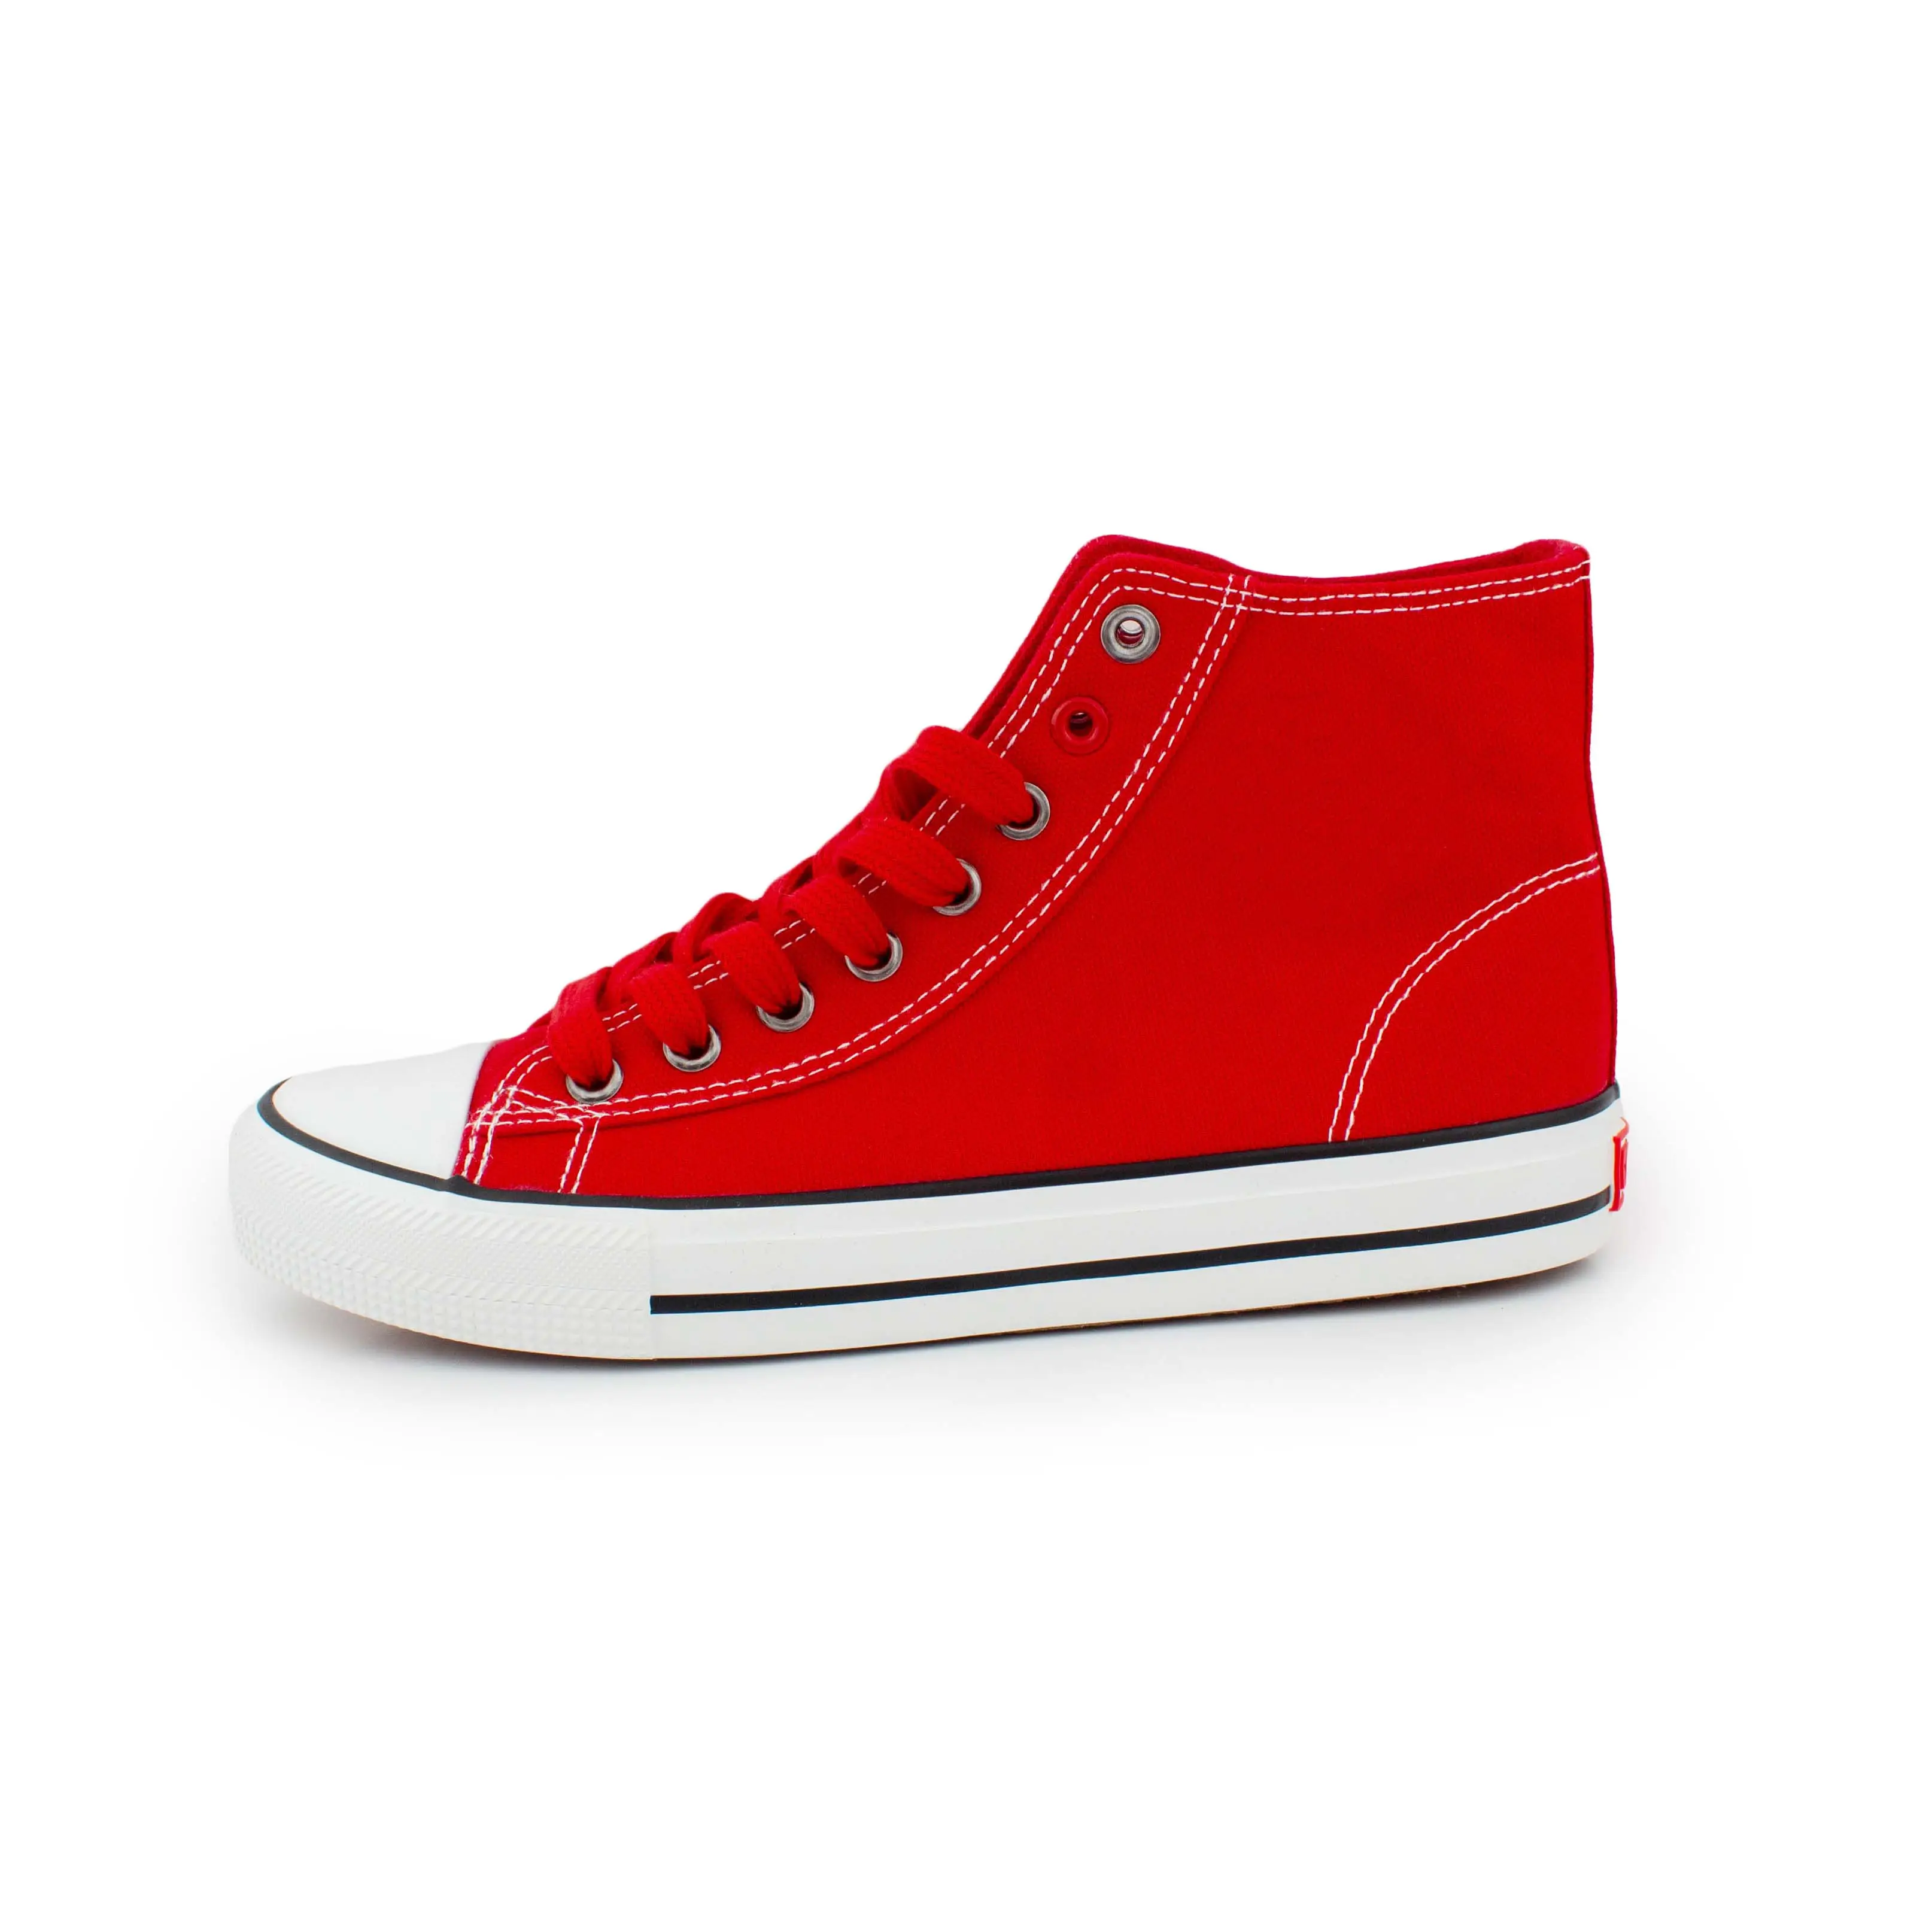 Customized Laces Logo High Top red canvas shoes luxury for men shoes casual sport